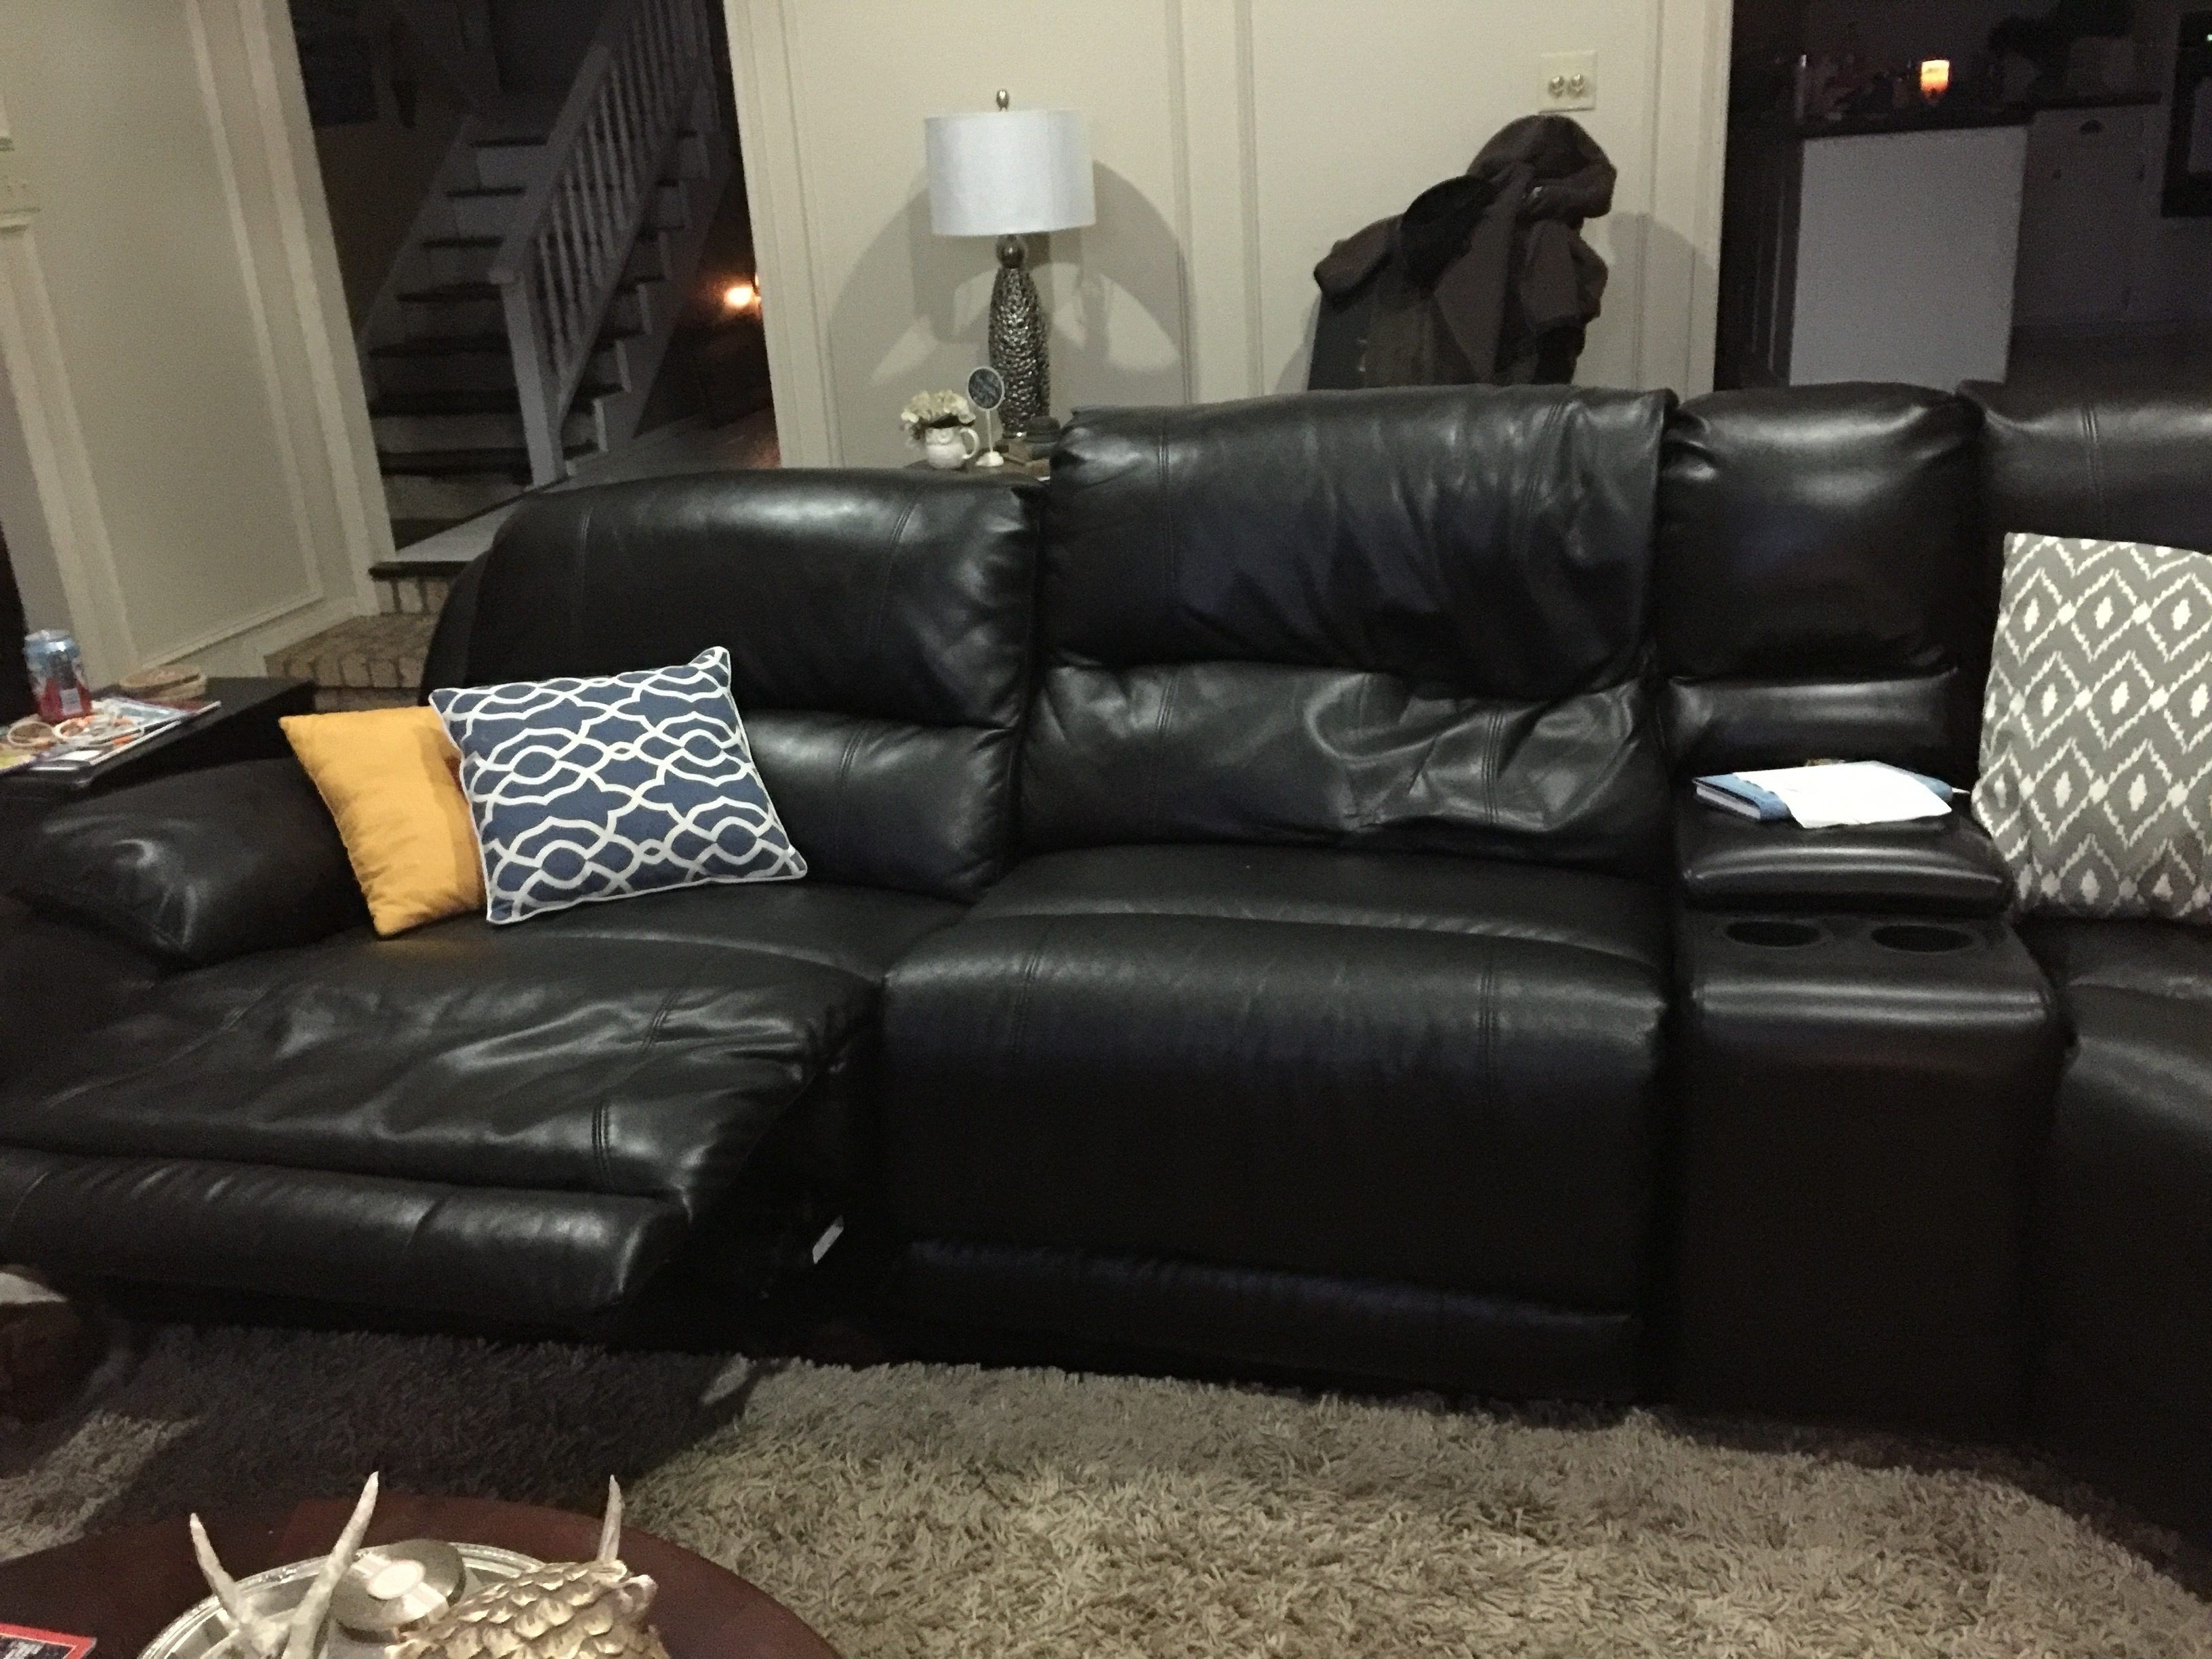 Favorite Sectional Sofa: Sectional Sofas On Craigslist Church Chairs For With Des Moines Ia Sectional Sofas (View 20 of 20)